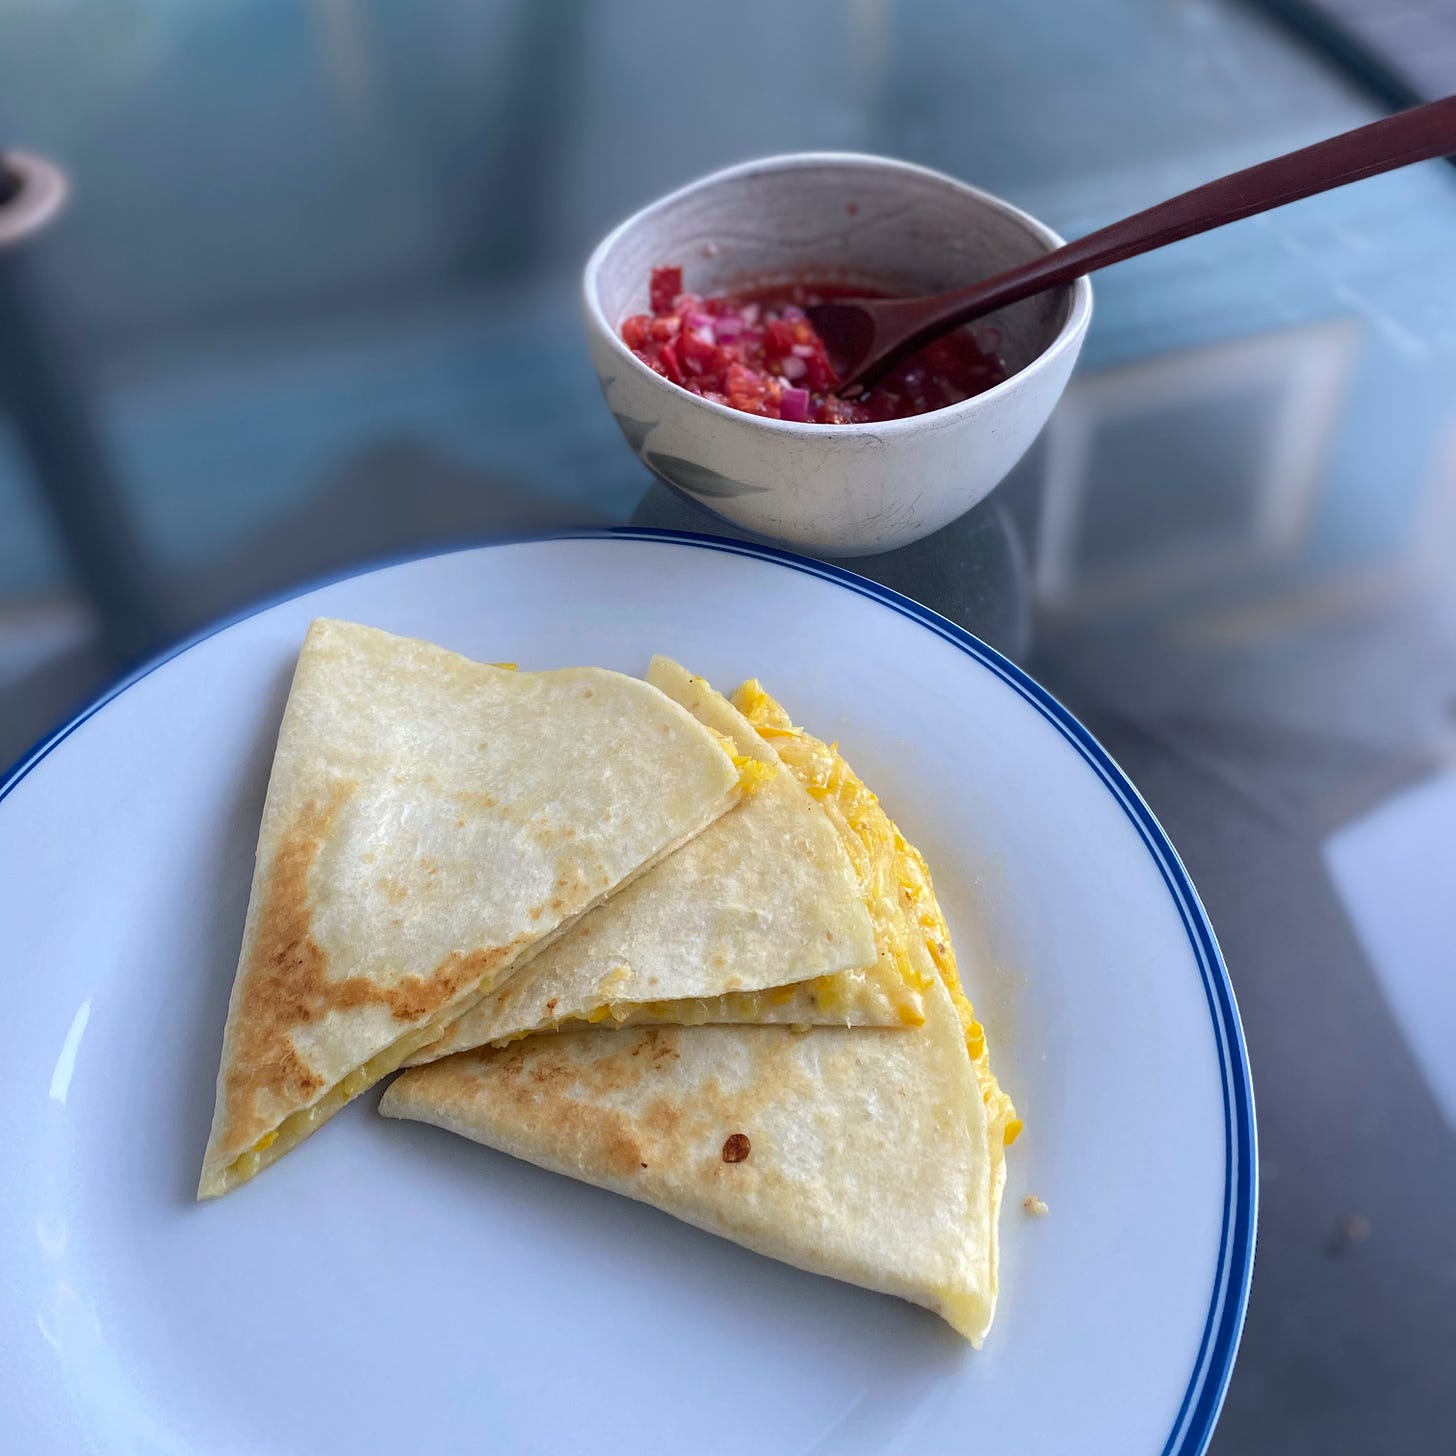 Three quesadilla triangles on a large white plate with a blue rim. Yellow zucchini and melted cheese are visible at the edge, and the tops are browned from the pan. In a small bowl behind the plate is the red onion and heirloom tomato salsa, with a spoon sticking out of it.